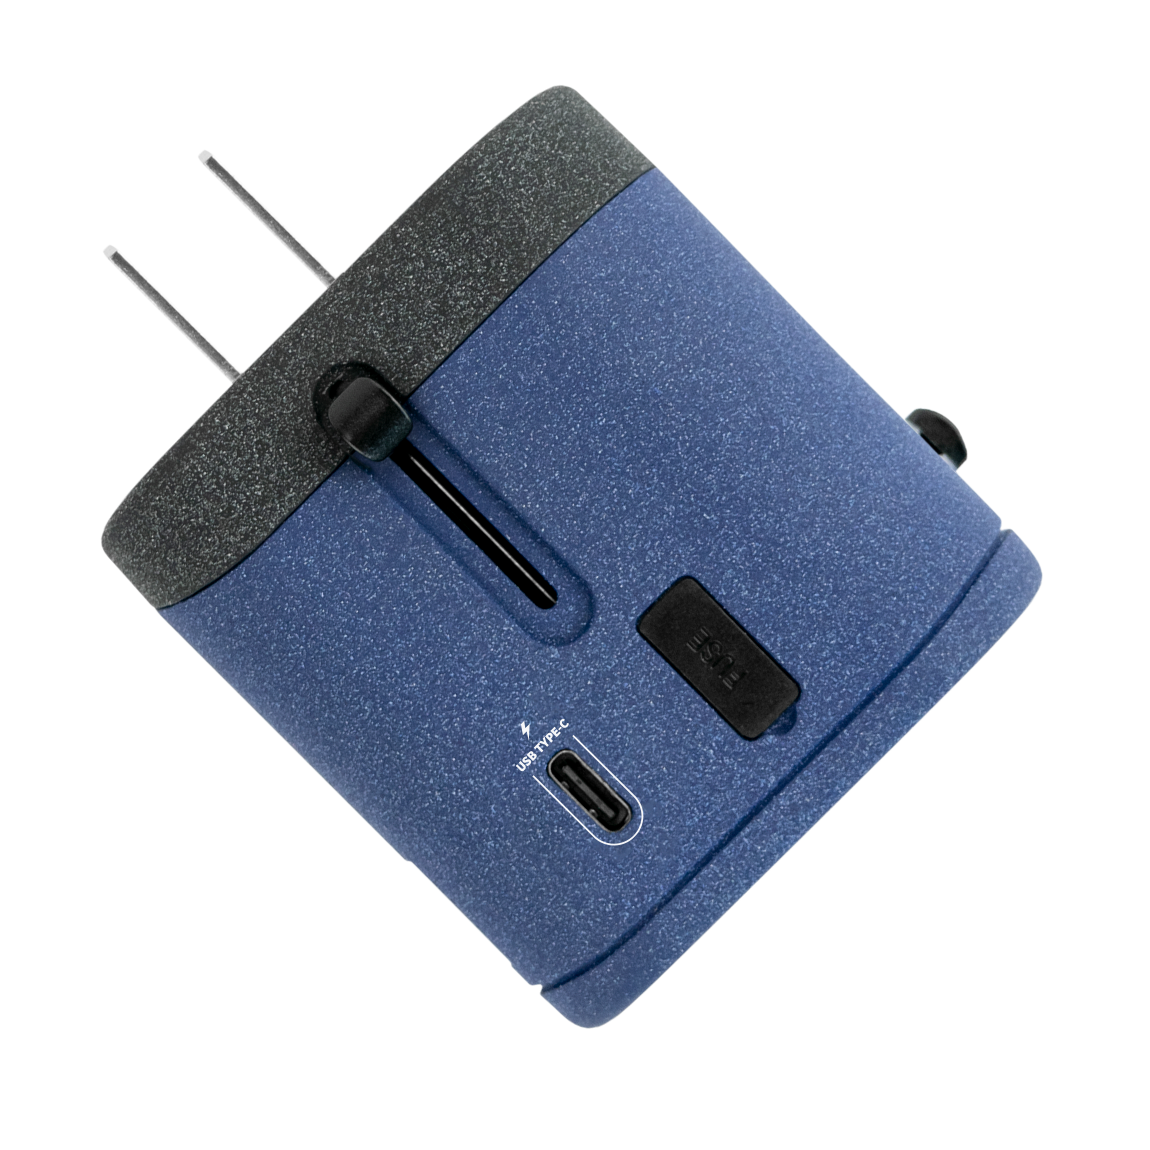 A textured blue and black universal travel adapter. Features 3 build in USB chargers and works in over 150 countries. This world travel adapter kit allows you to charge 5 devices simultaneously. This compact and lightweight universal travel adapter is perfect for your next trip.